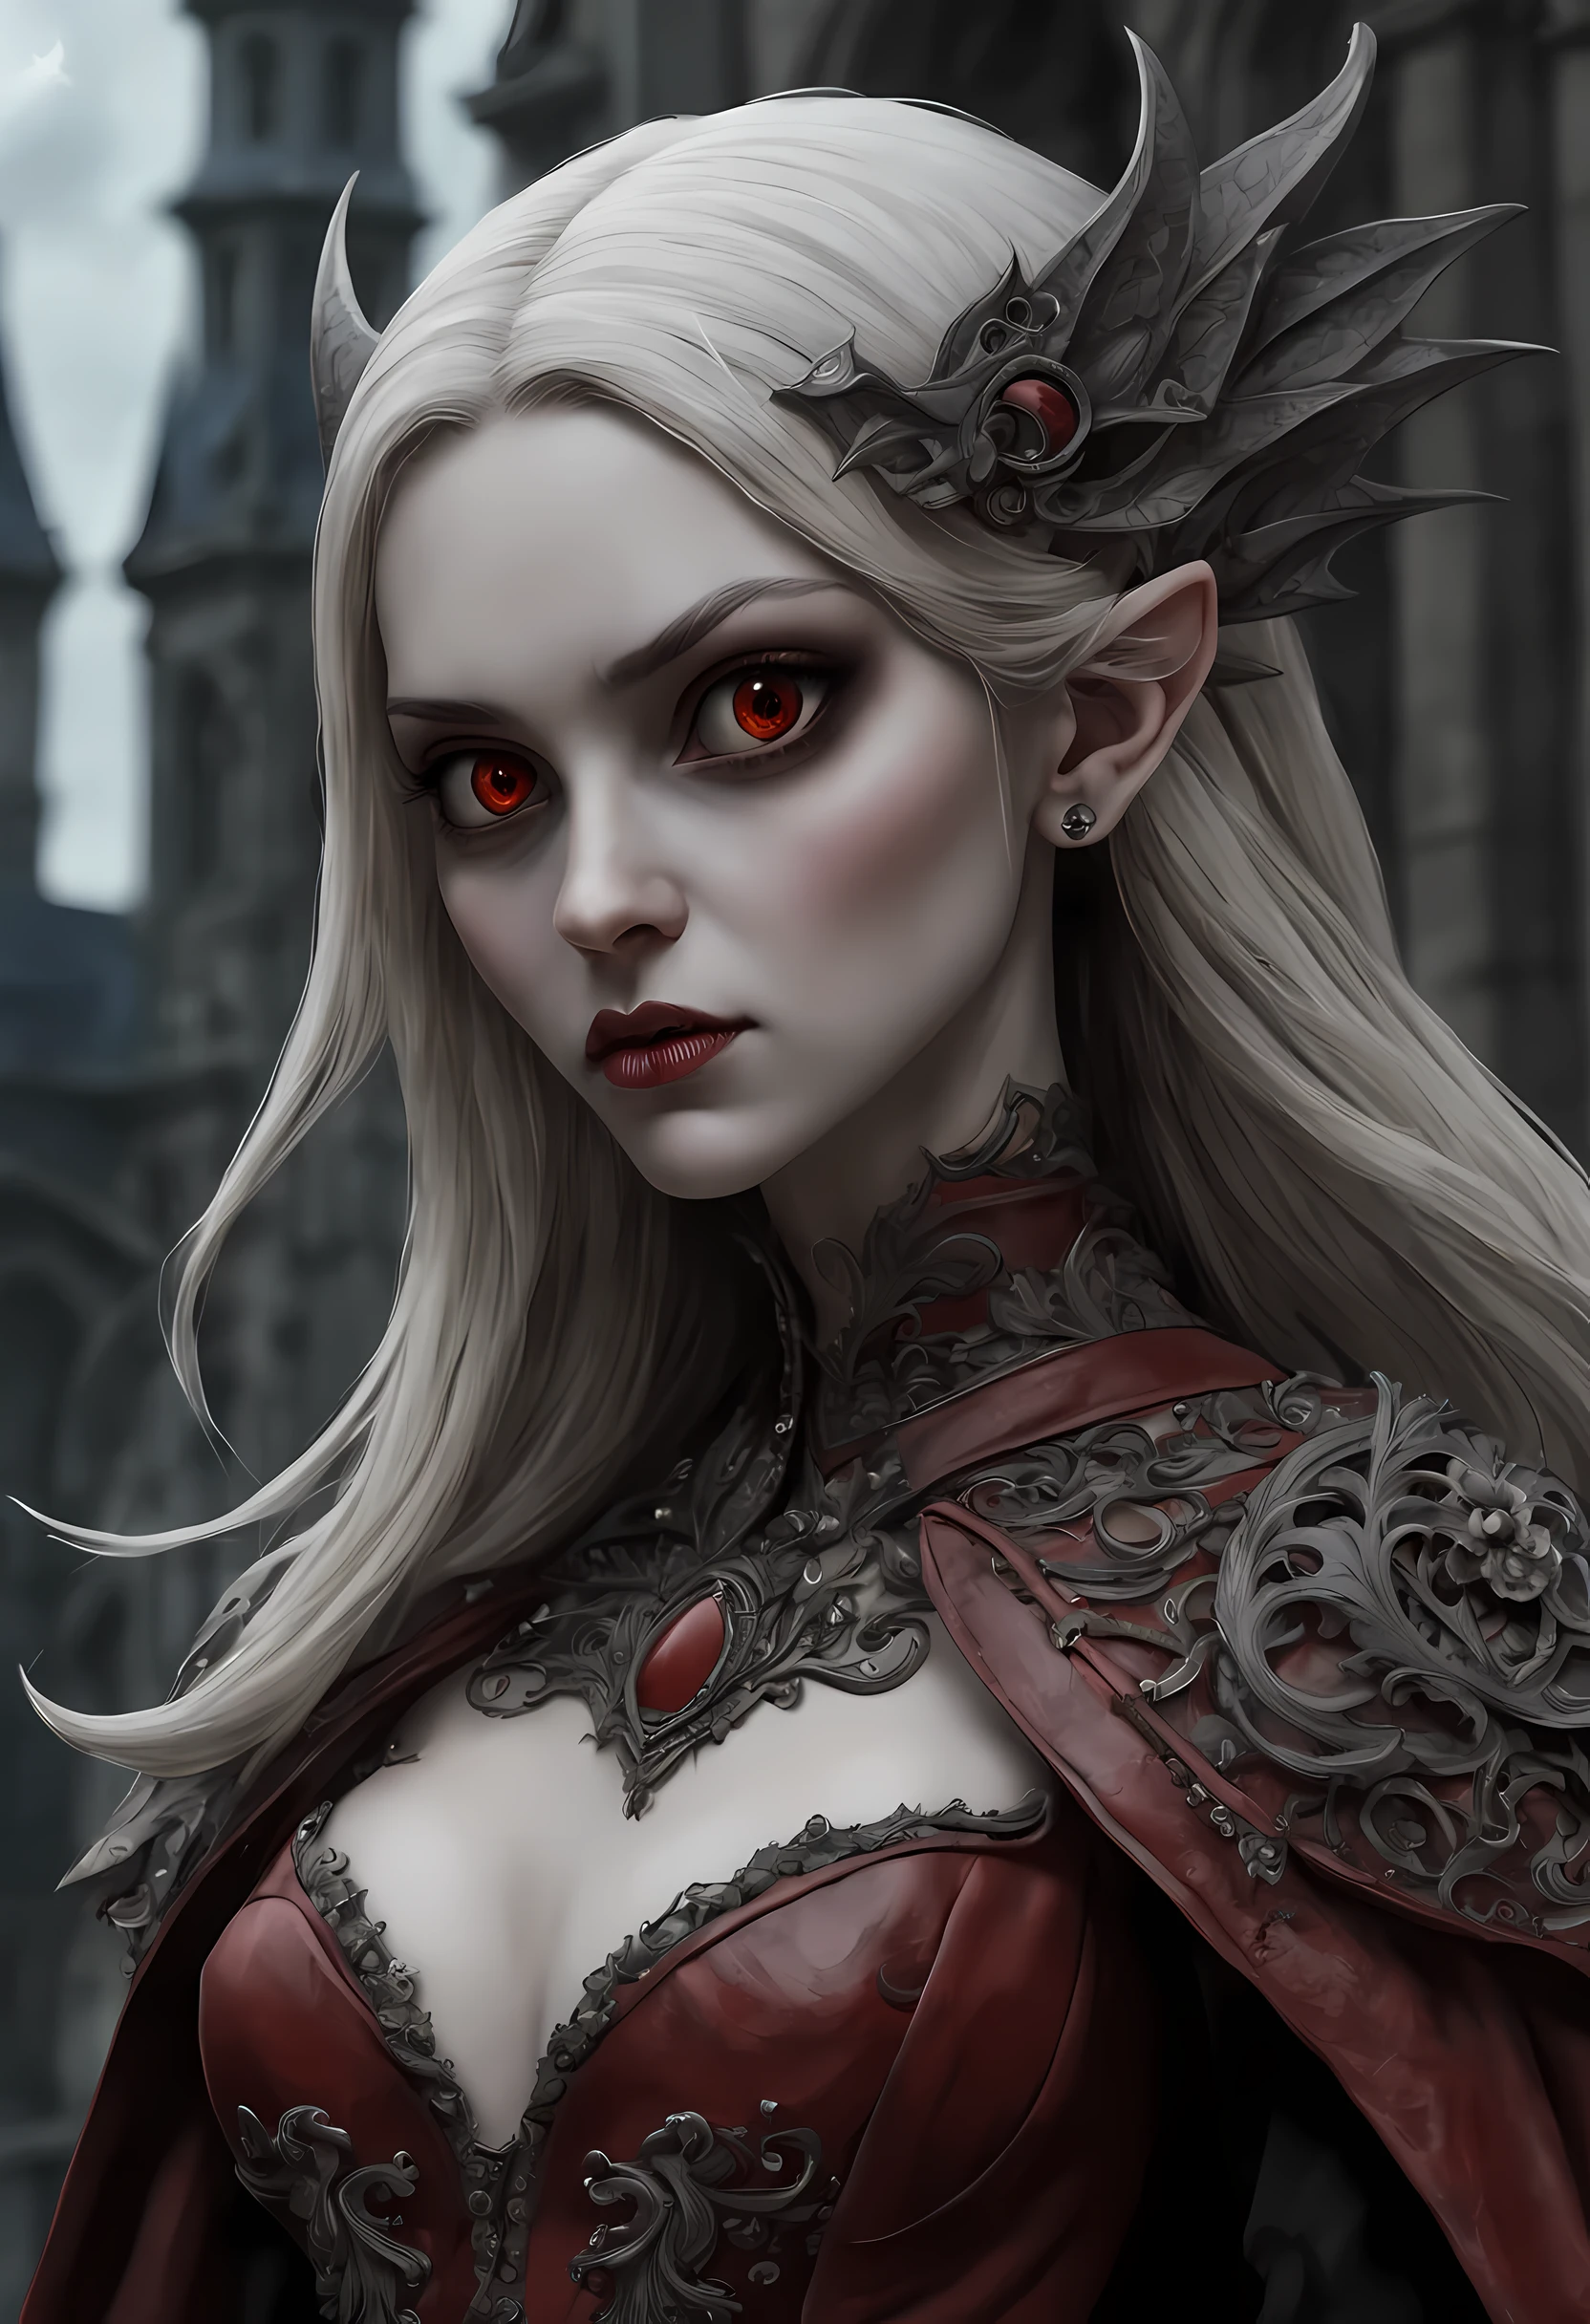 arafed, dark fantasy art, gothic art, (masterpiece:1.5), full body best details, highly detailed, best quality, highres, NeroV2, full body portrait of a vampire, elf (Masterpiece, best quality, ultra feminine: 1.5)  with a long curvy hair, dark color hair, red eyes (fantasy art, Masterpiece, best quality: 1.3), ((beautiful delicate face)), Ultra Detailed Face (intricate details, fantasy art, Masterpiece, best quality: 1.5), [visible vampiric fangs] (intricate details, fantasy art, Masterpiece, best quality: 1.5), [anatomically correct] red cloak, flowing cloak (intense details, fantasy art, Masterpiece, best quality: 1.3), wearing an intricate leather [white] dress (intricate details, gothic art, Masterpiece, best quality: 1.5), high heeled boots, blood dripping on lips, urban background (intense details, beat details), fantasy, at night light, natural ,moon light, soft moon light, moon rays, clouds, gothic atmosphere, gothic street background, bats flying in background, soft light, dynamic light, [[anatomically correct]], high details, best quality, 16k, [ultra detailed], masterpiece, best quality, (extremely detailed), dynamic angle, ultra wide shot, RAW, photorealistic